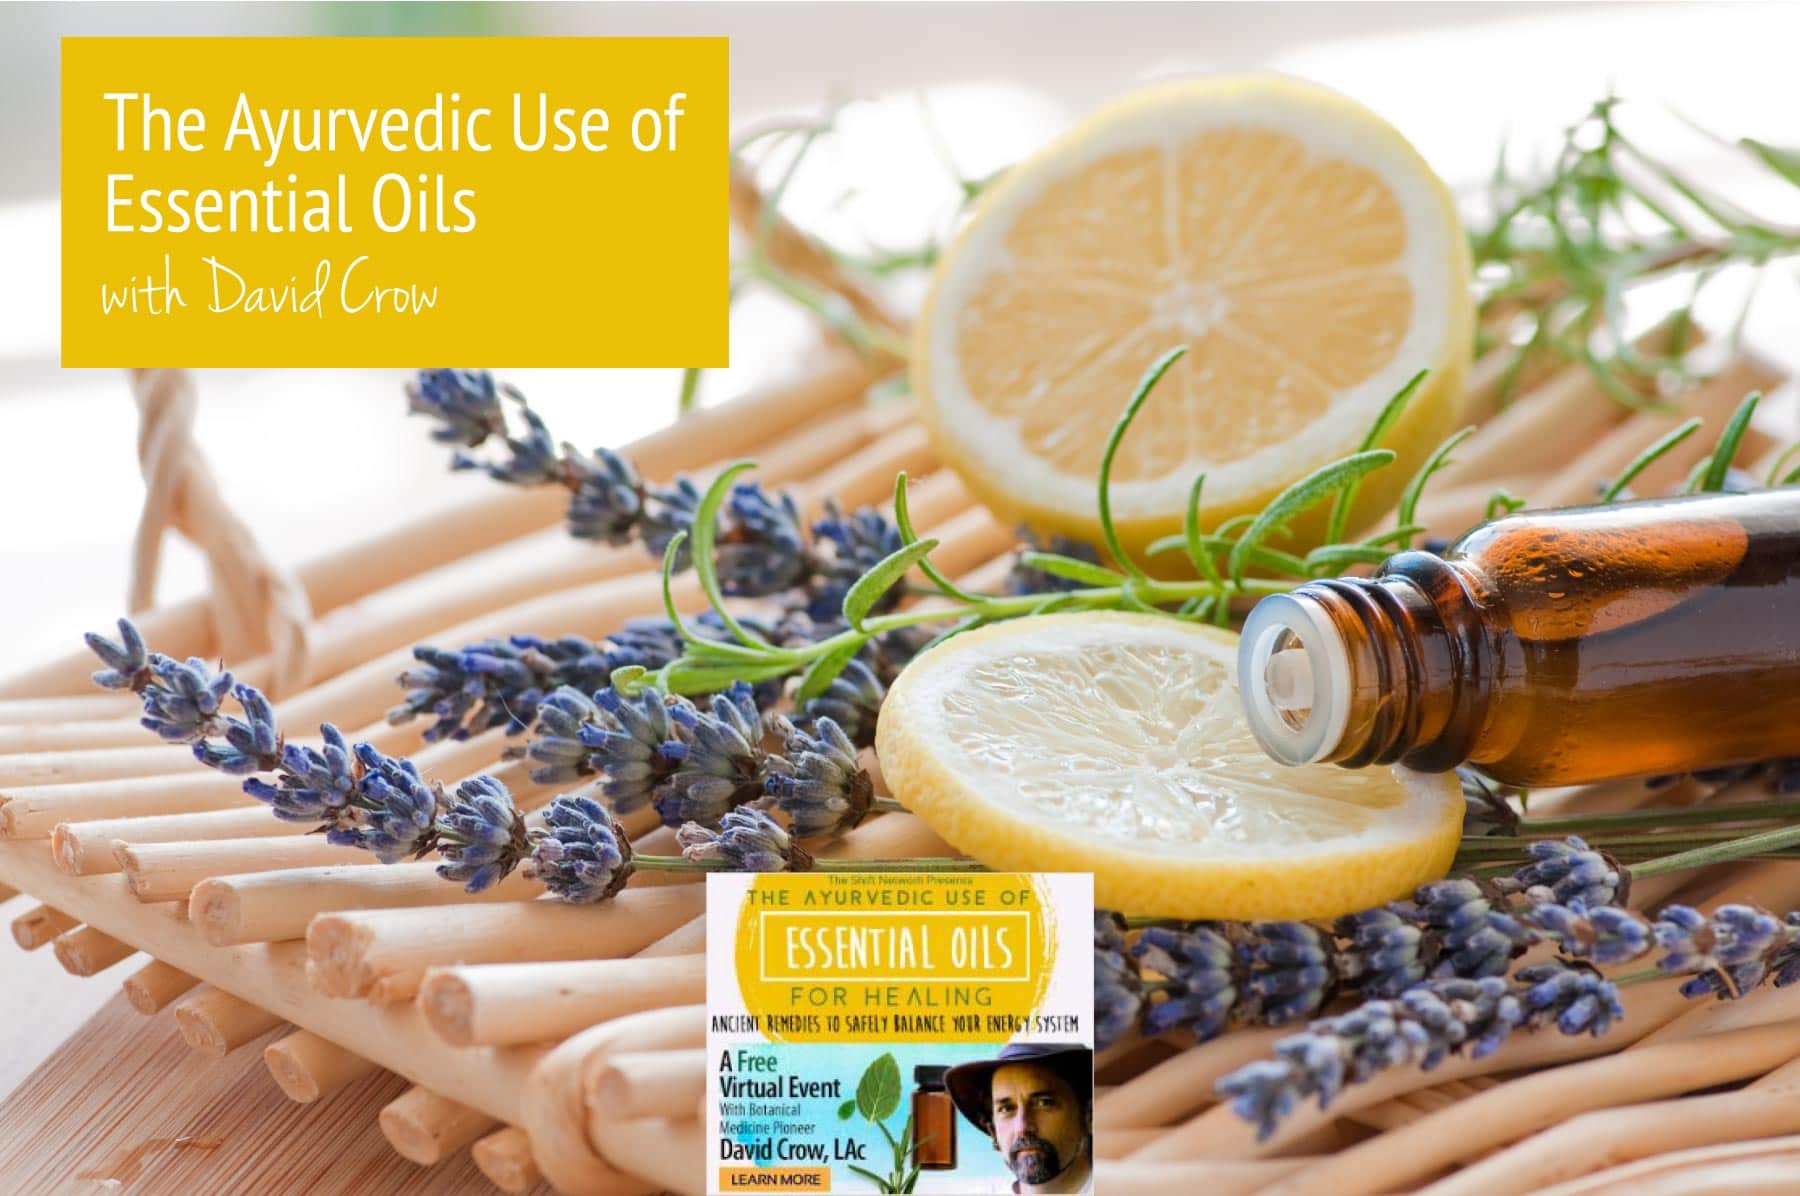 The Ayurvedic Use of Essential Oils with David Crow